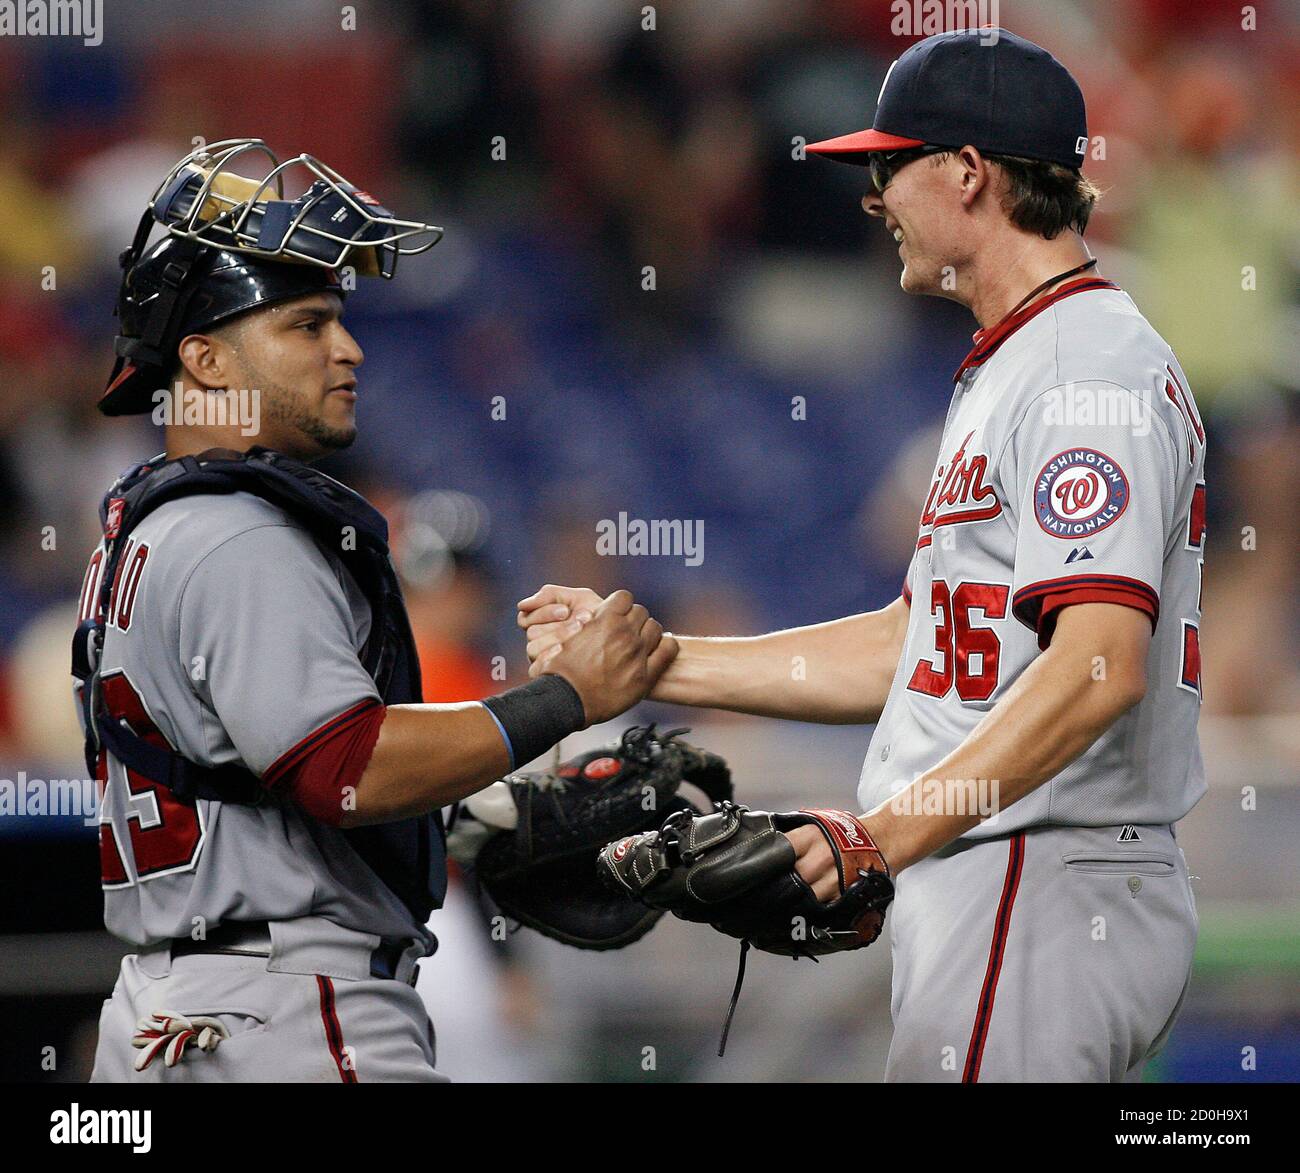 Washington Nationals' catcher Jhonatan Solano (L) greets pitcher Tyler Clippard after their team defeated the Miami Marlins in a MLB National League baseball game in Miami, Florida July 15, 2012. REUTERS/Andrew Innerarity (UNITED STATES - Tags: SPORT BASEBALL) Stock Photo